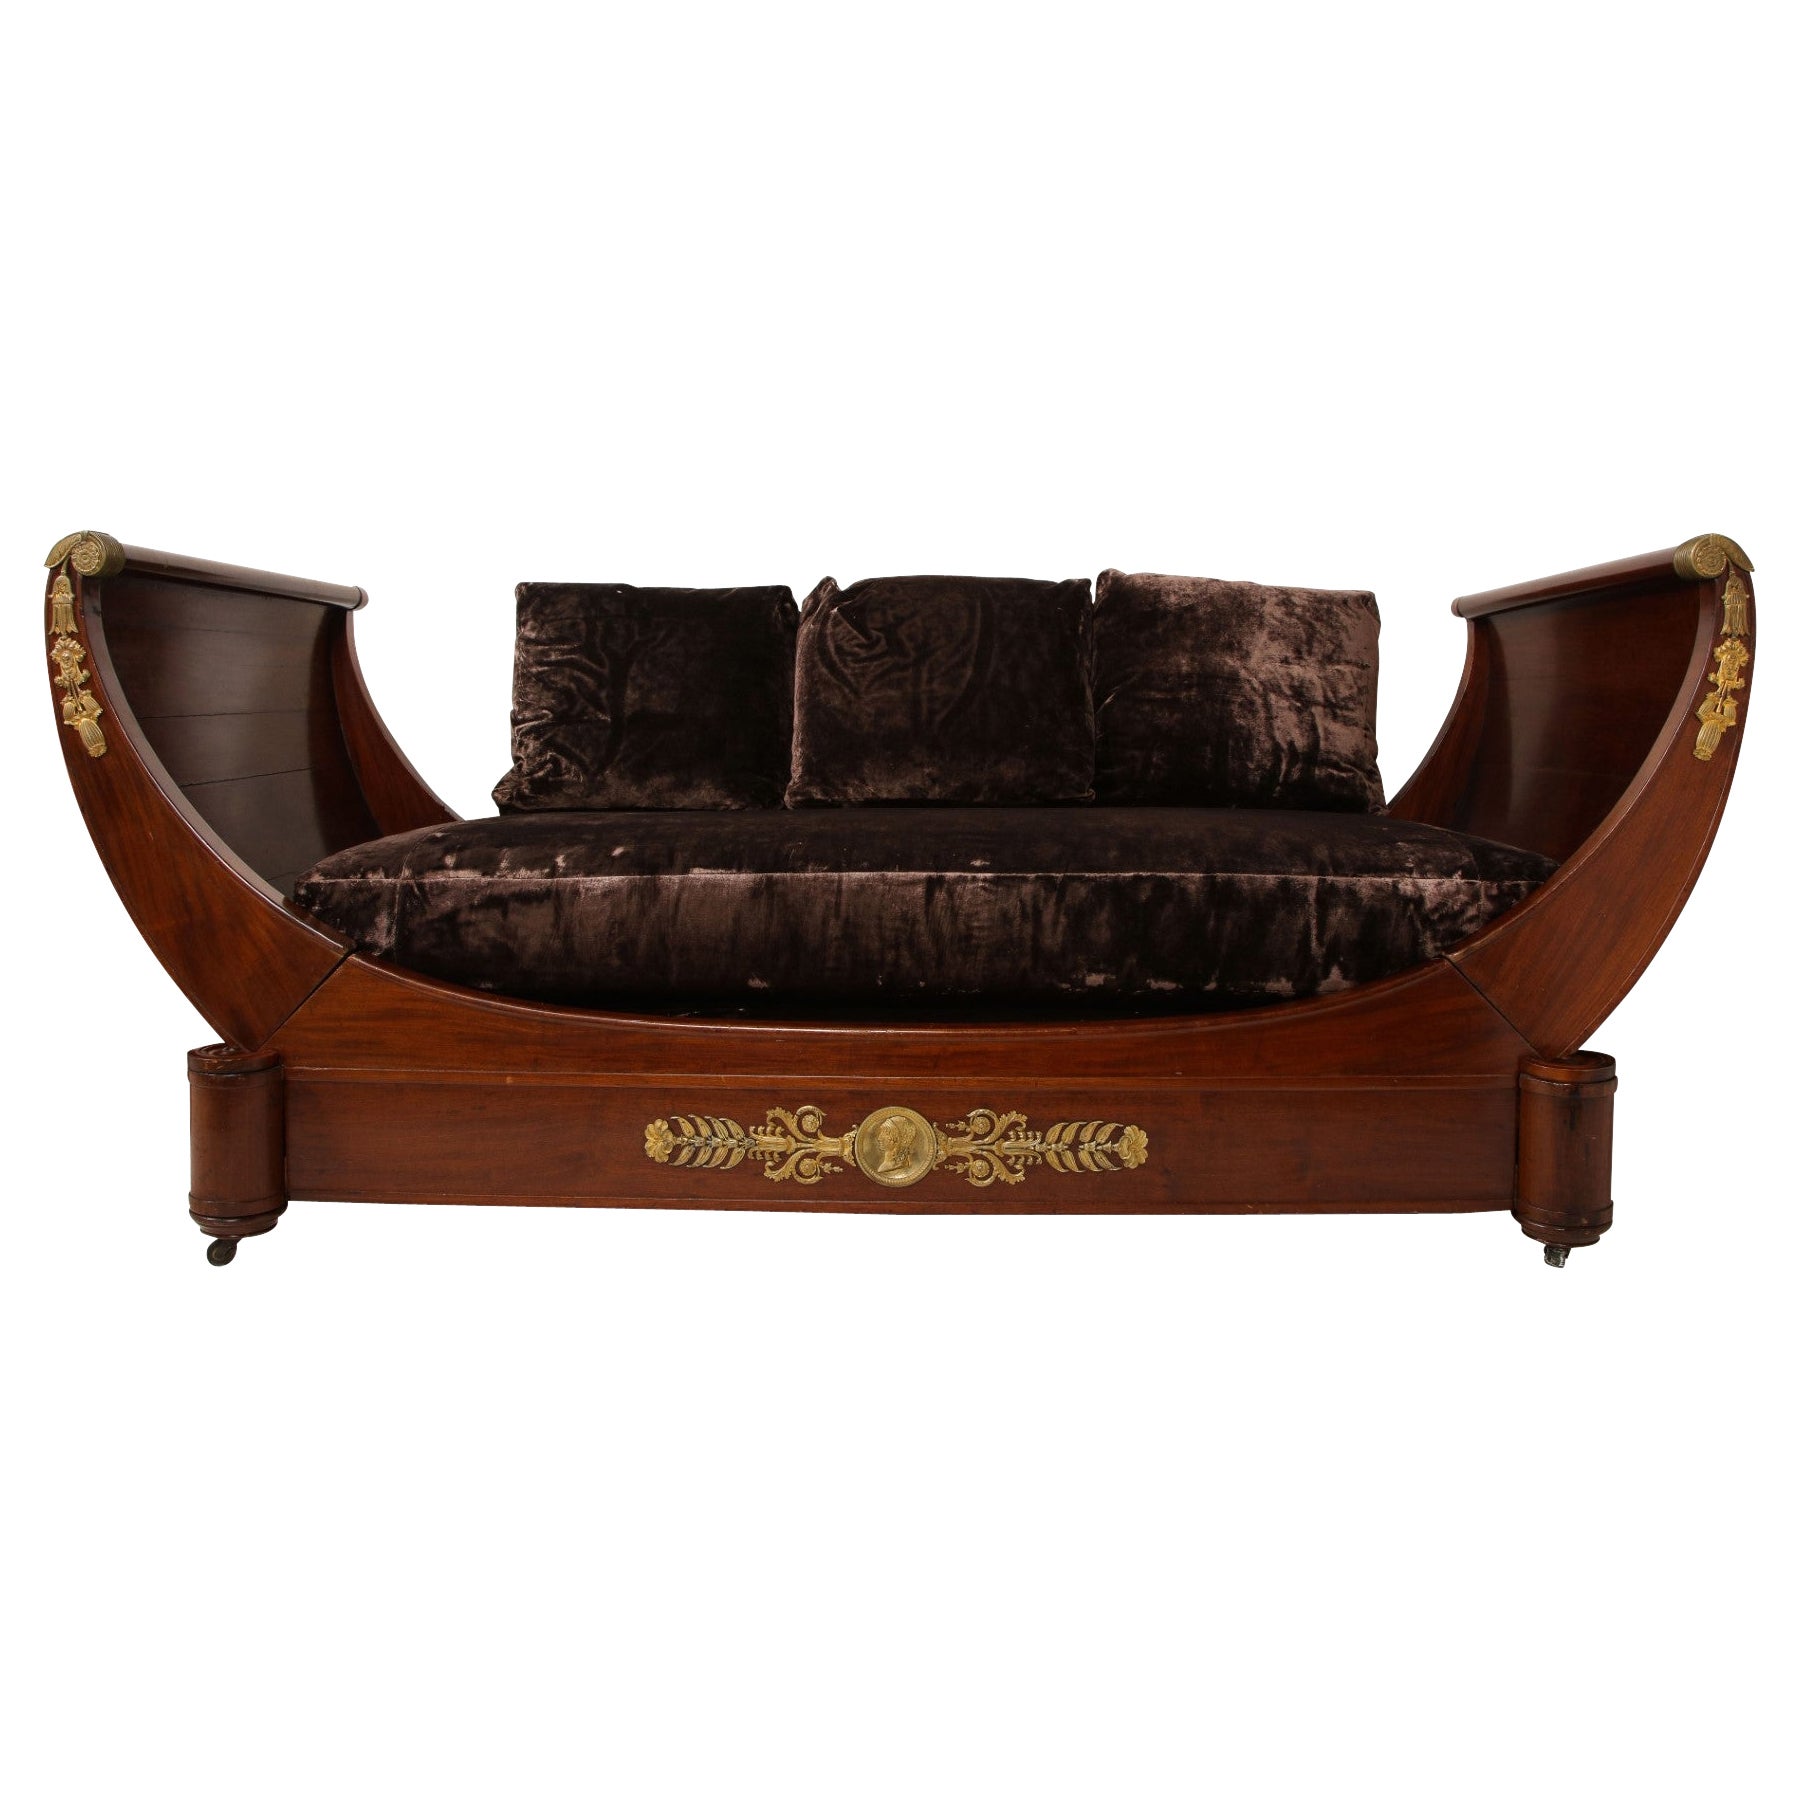 French Empire Style Mahogany Daybed with Ormolu Mounts and Velvet Upholstery